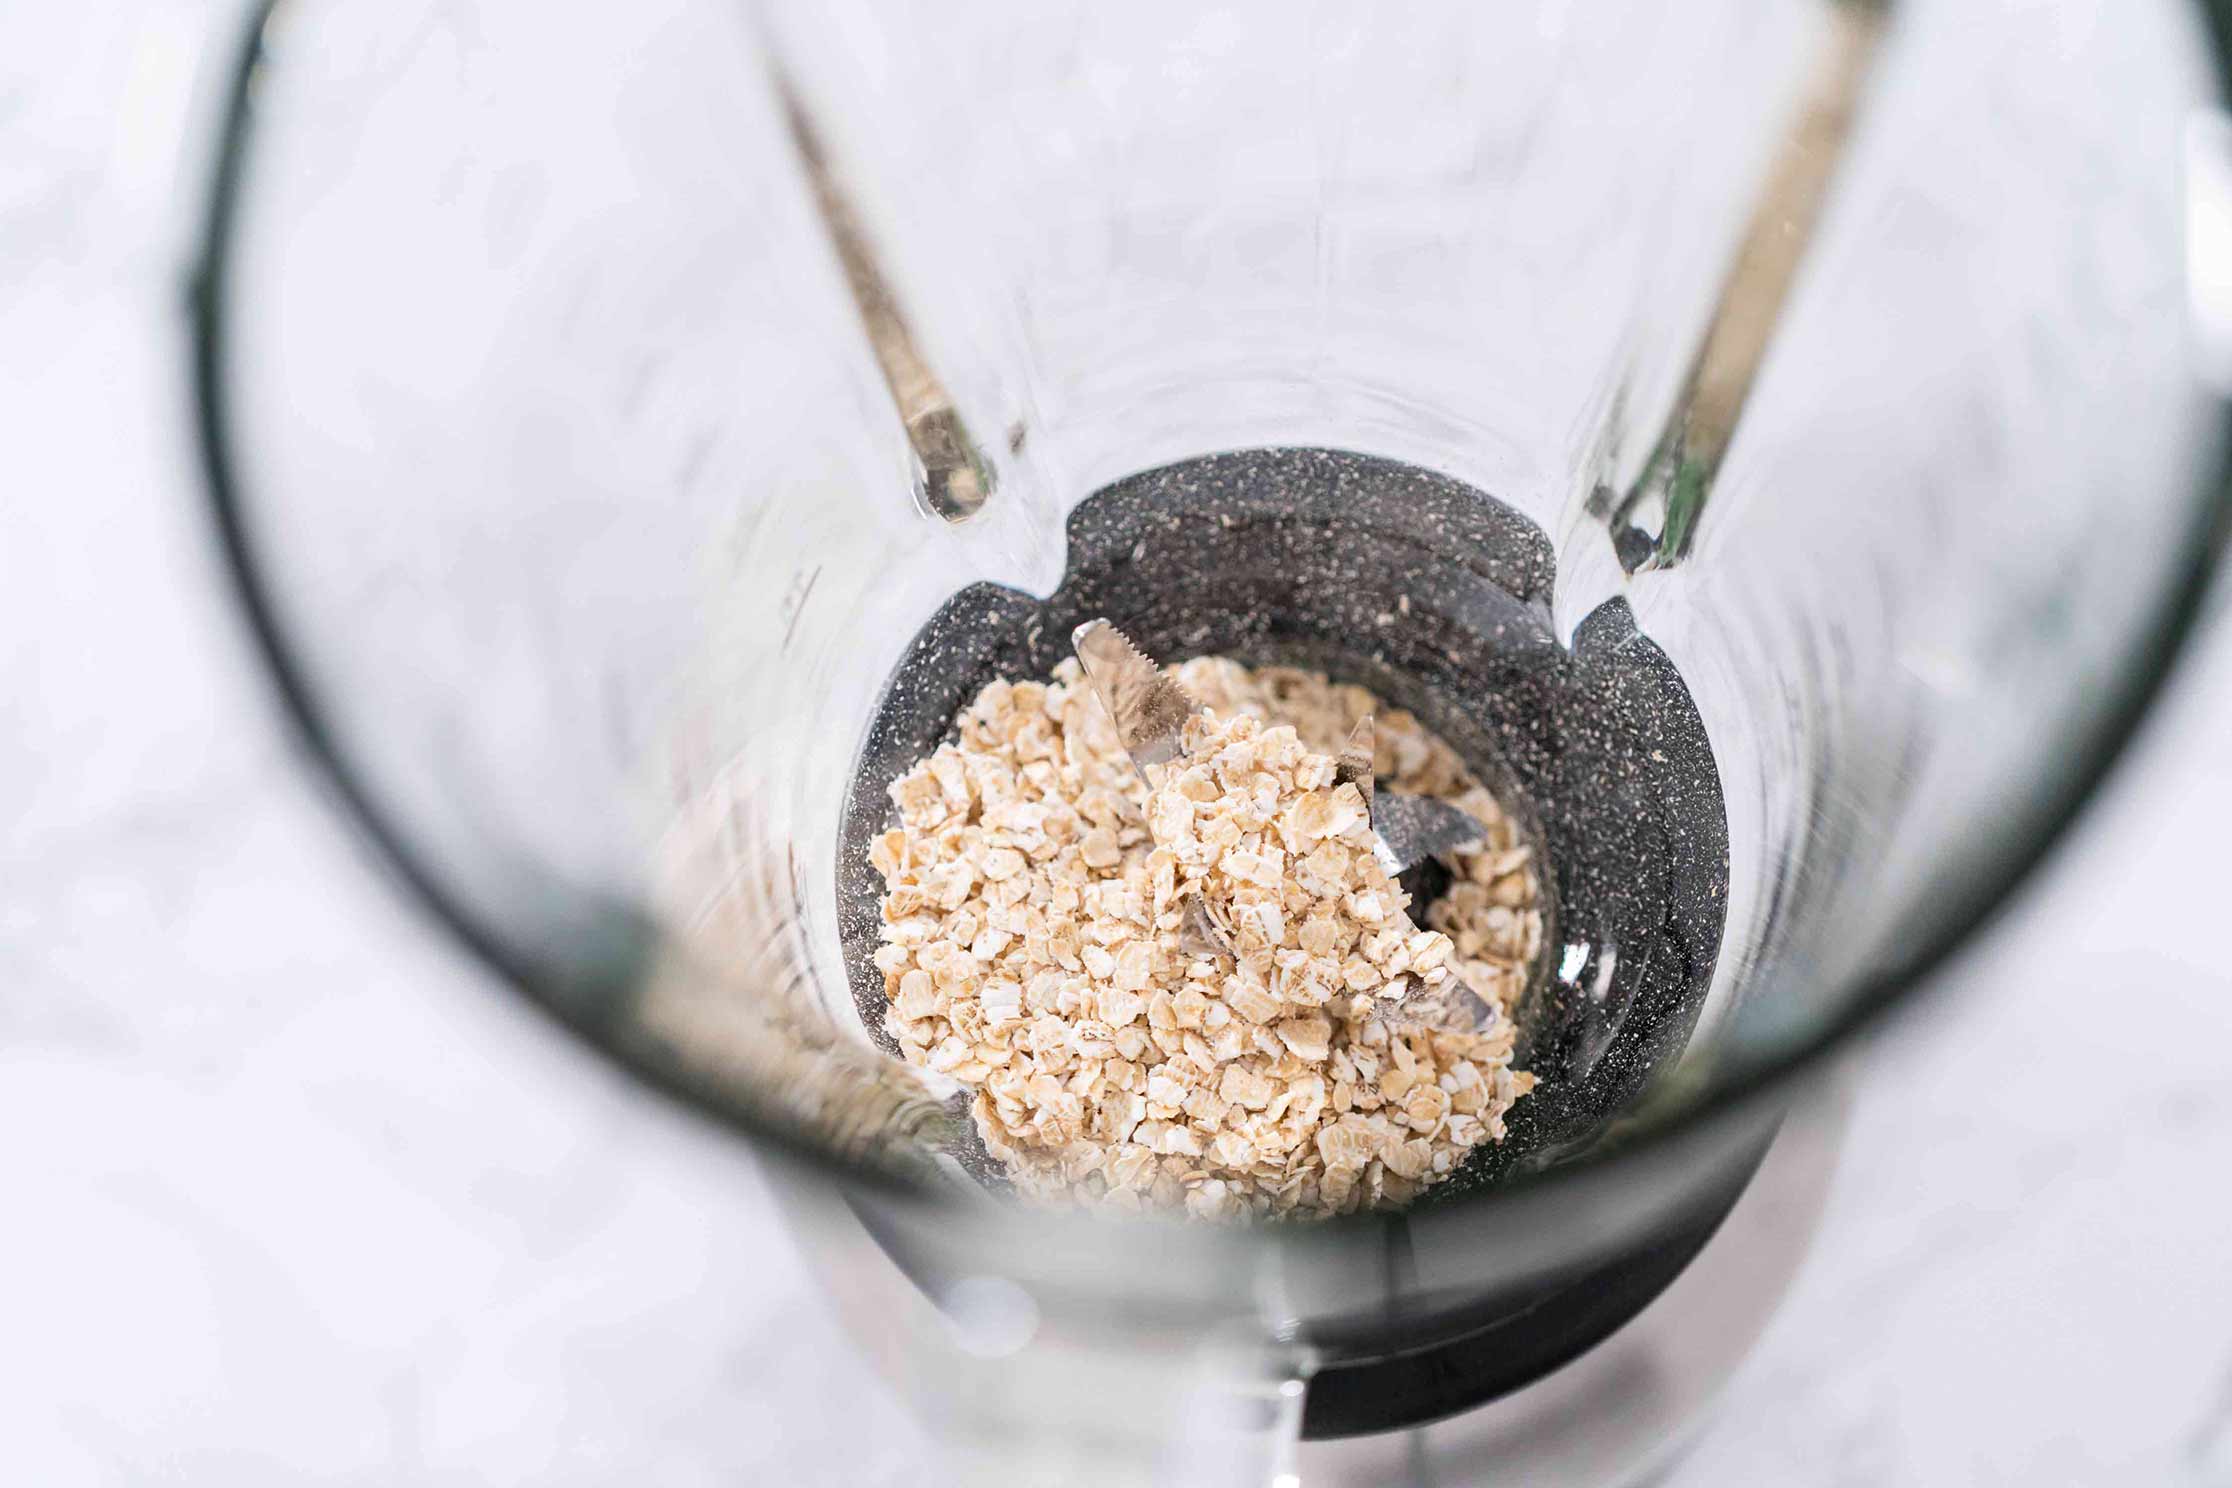 A top down view of some oats in a blender before being ground into oat flour